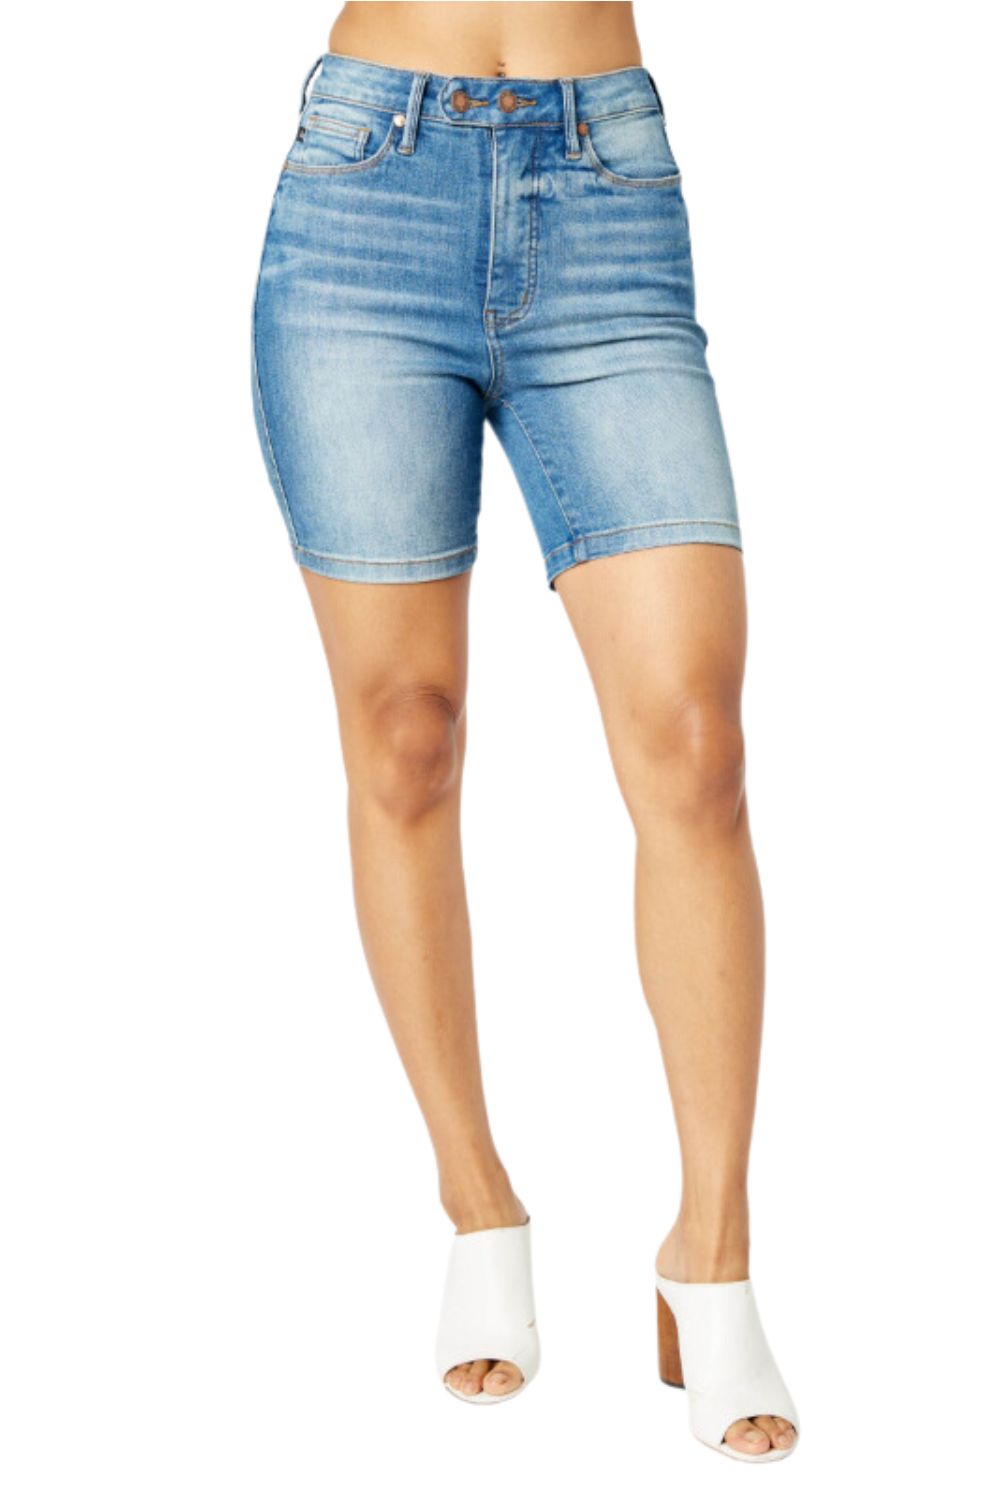 Bailey Ray and Co - Distressed High Waisted Denim Shorts - The Emily